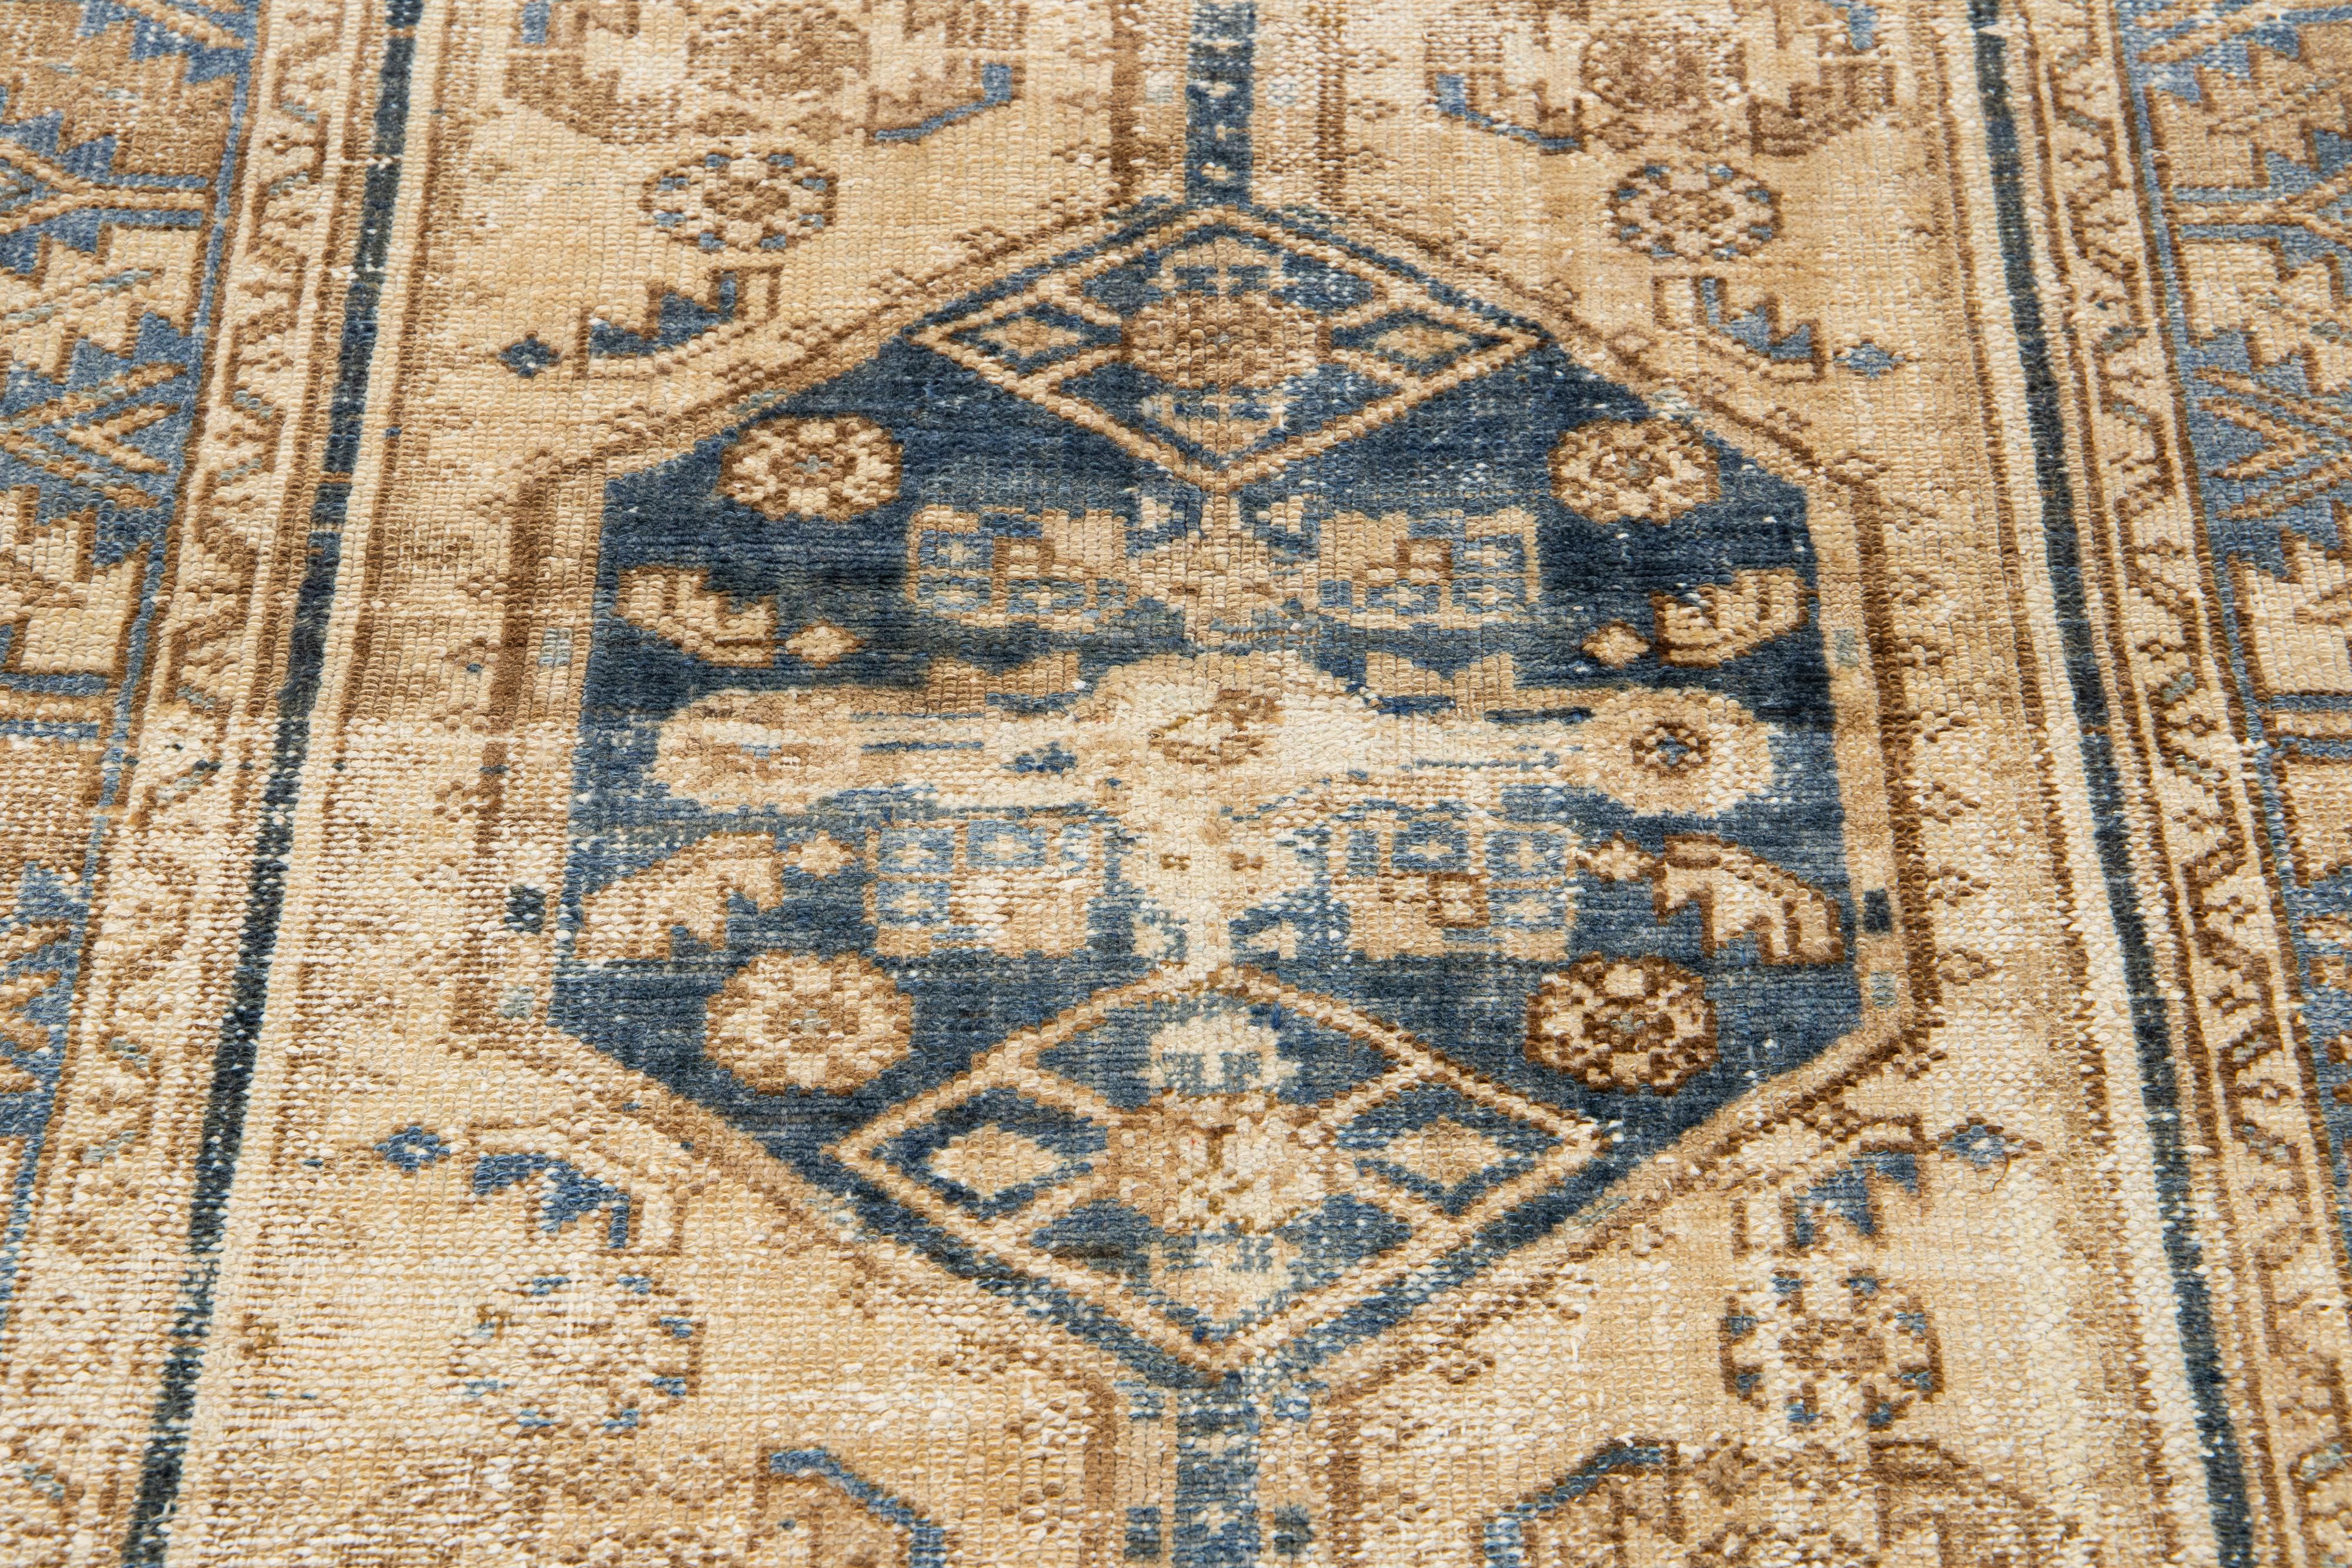  Antique Hamadan Tribal Wool Rug In Blue and Beige In Good Condition For Sale In Norwalk, CT